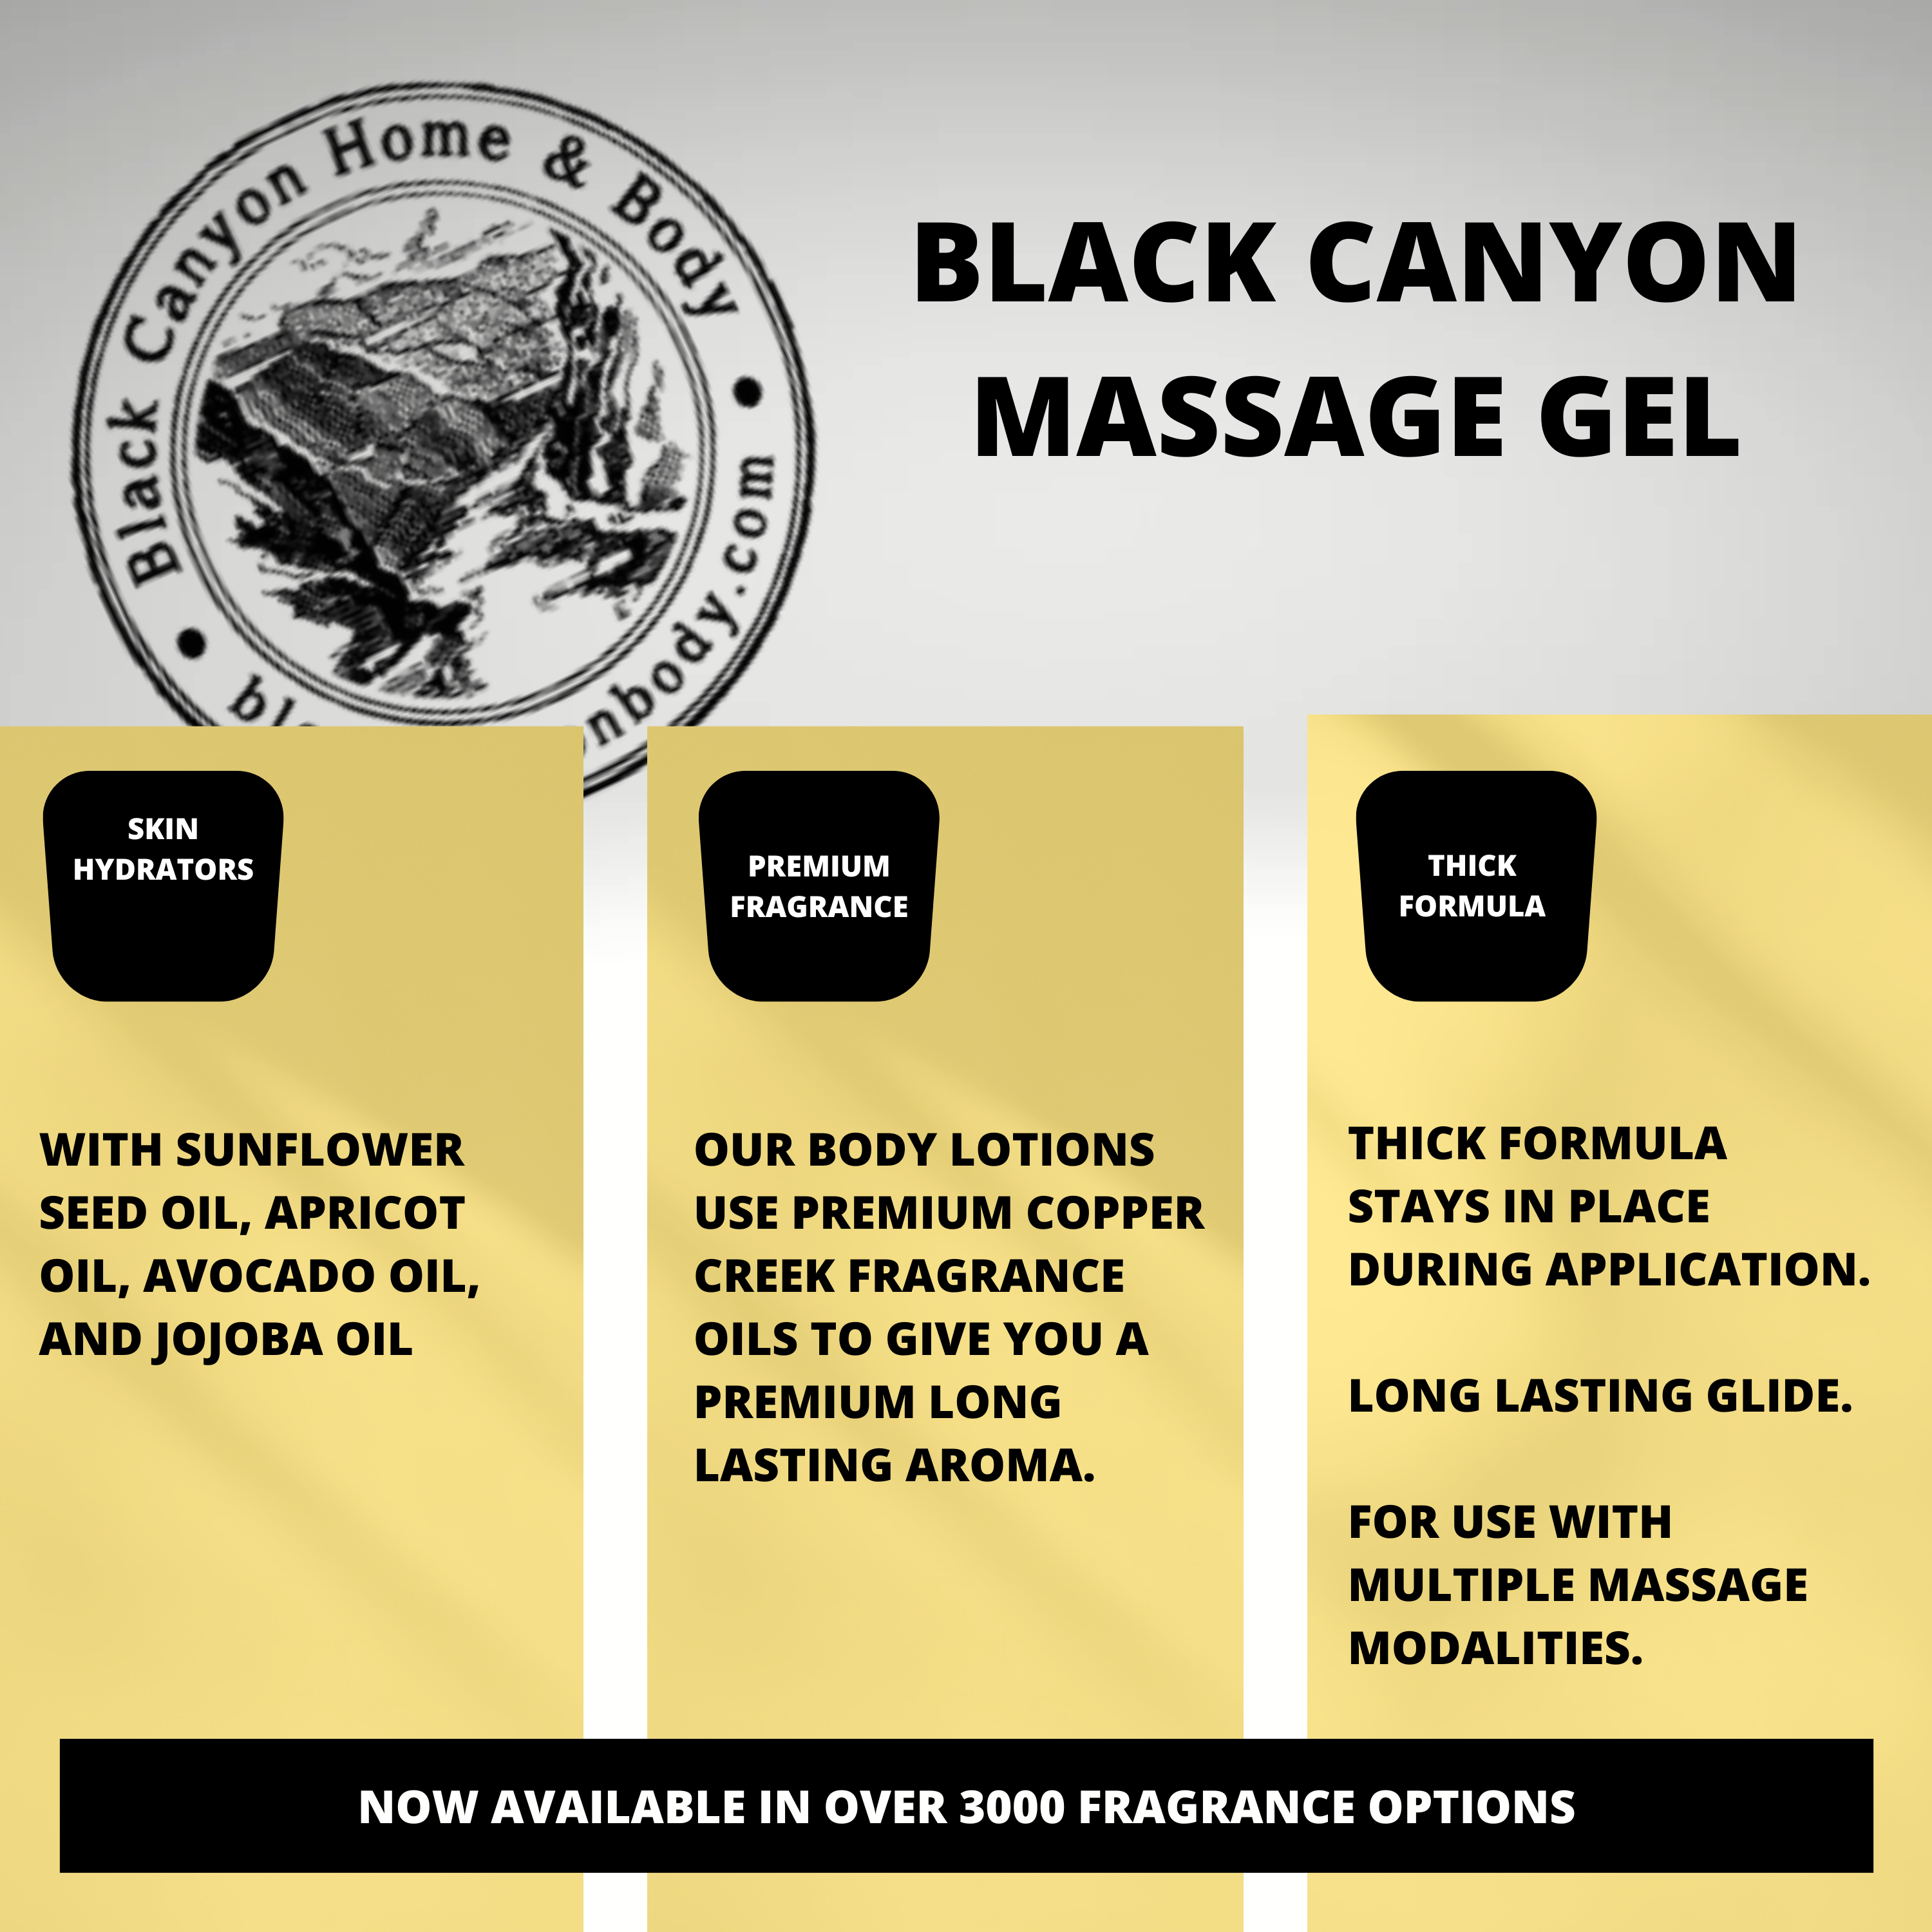 Black Canyon Friday Scented Massage Gel